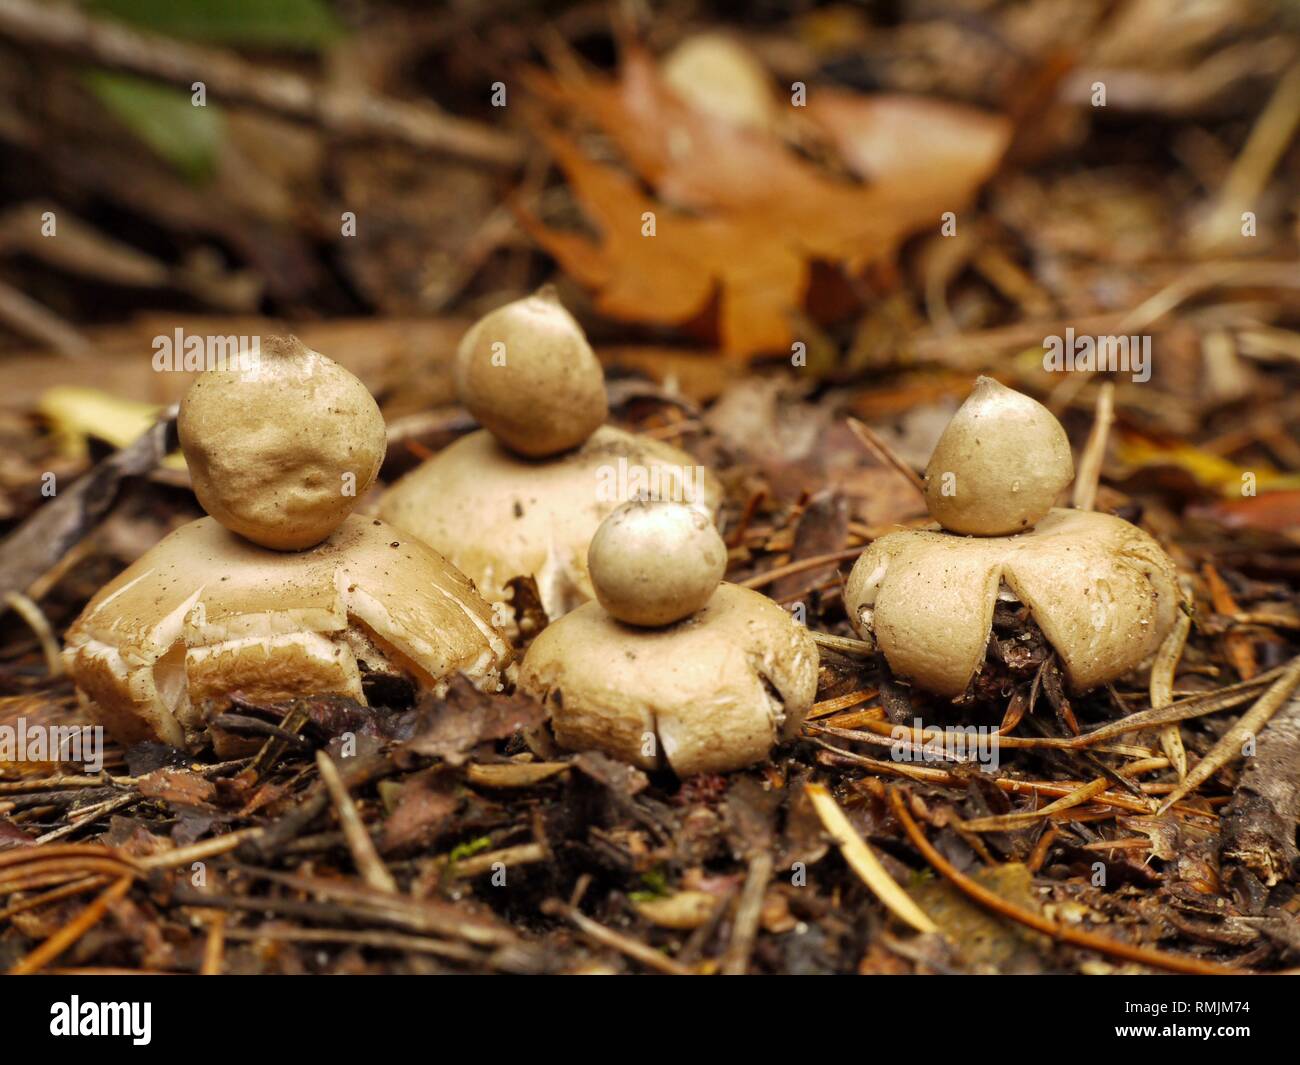 A group of Collared Earthstar fungi, Geastrum Triplex. Stock Photo